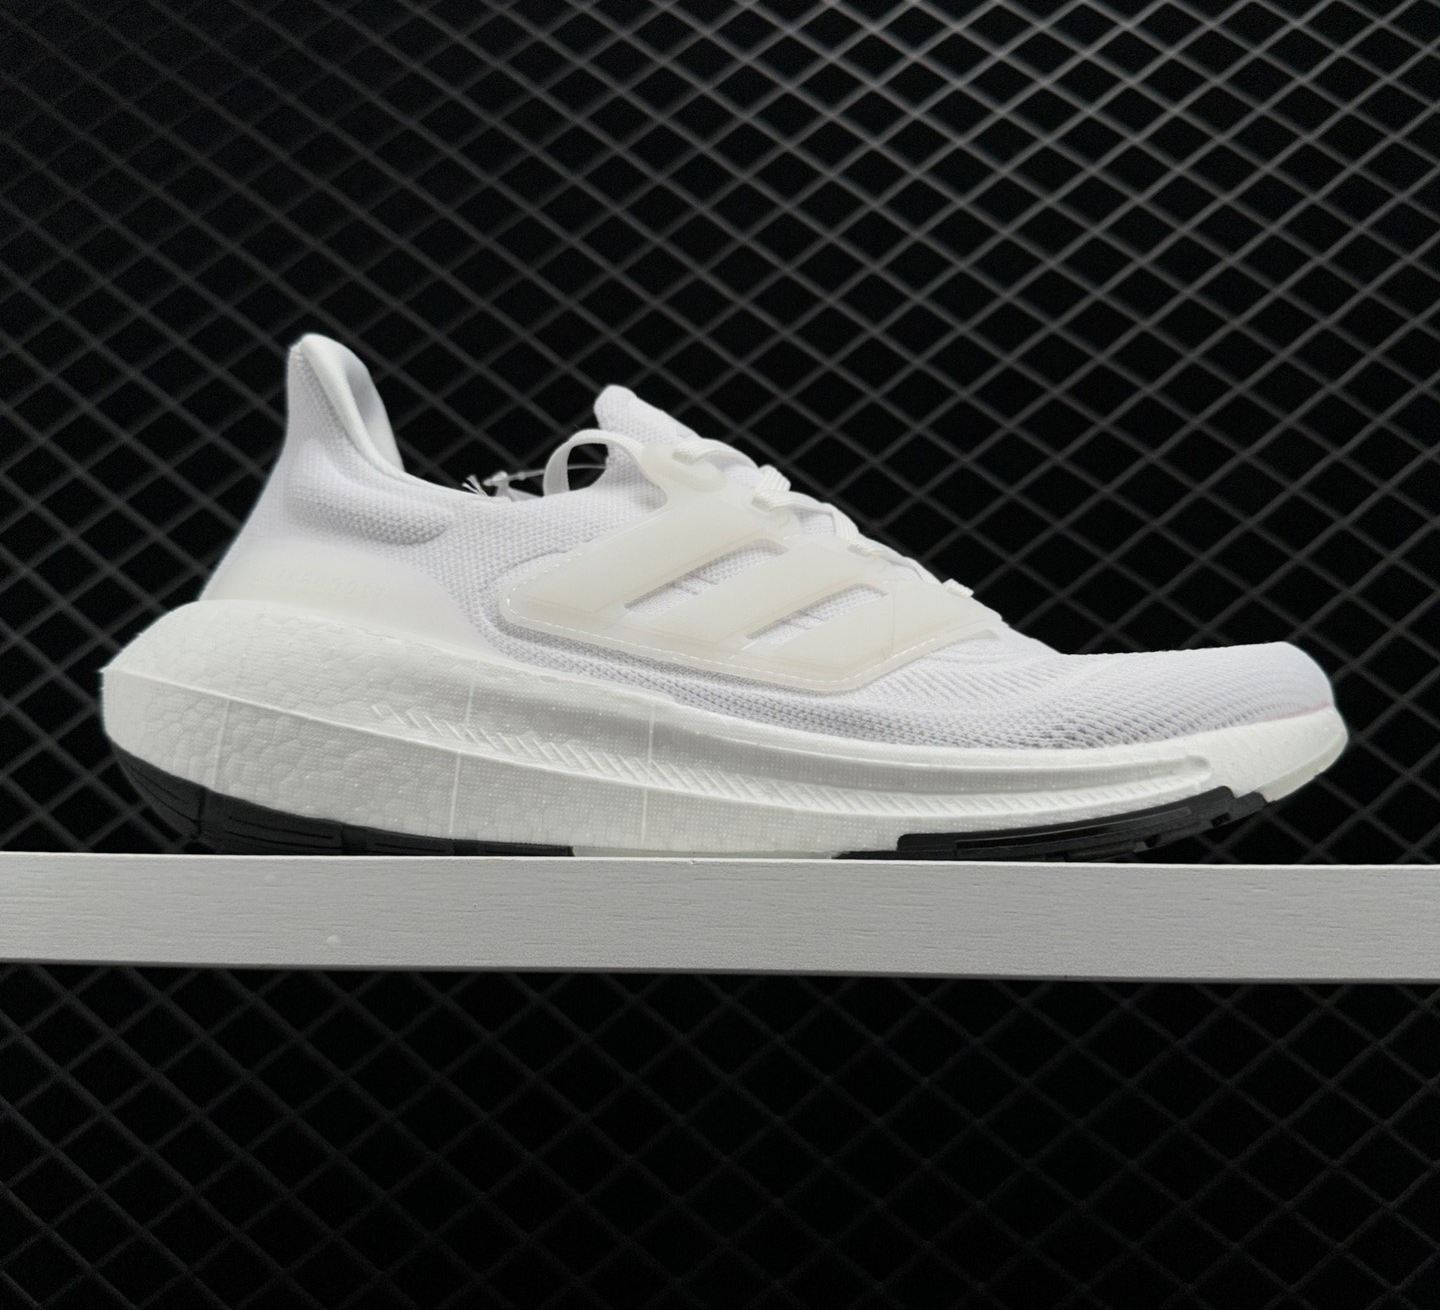 Adidas Ultraboost Light Running Shoes - White GY9352 | Shop Now